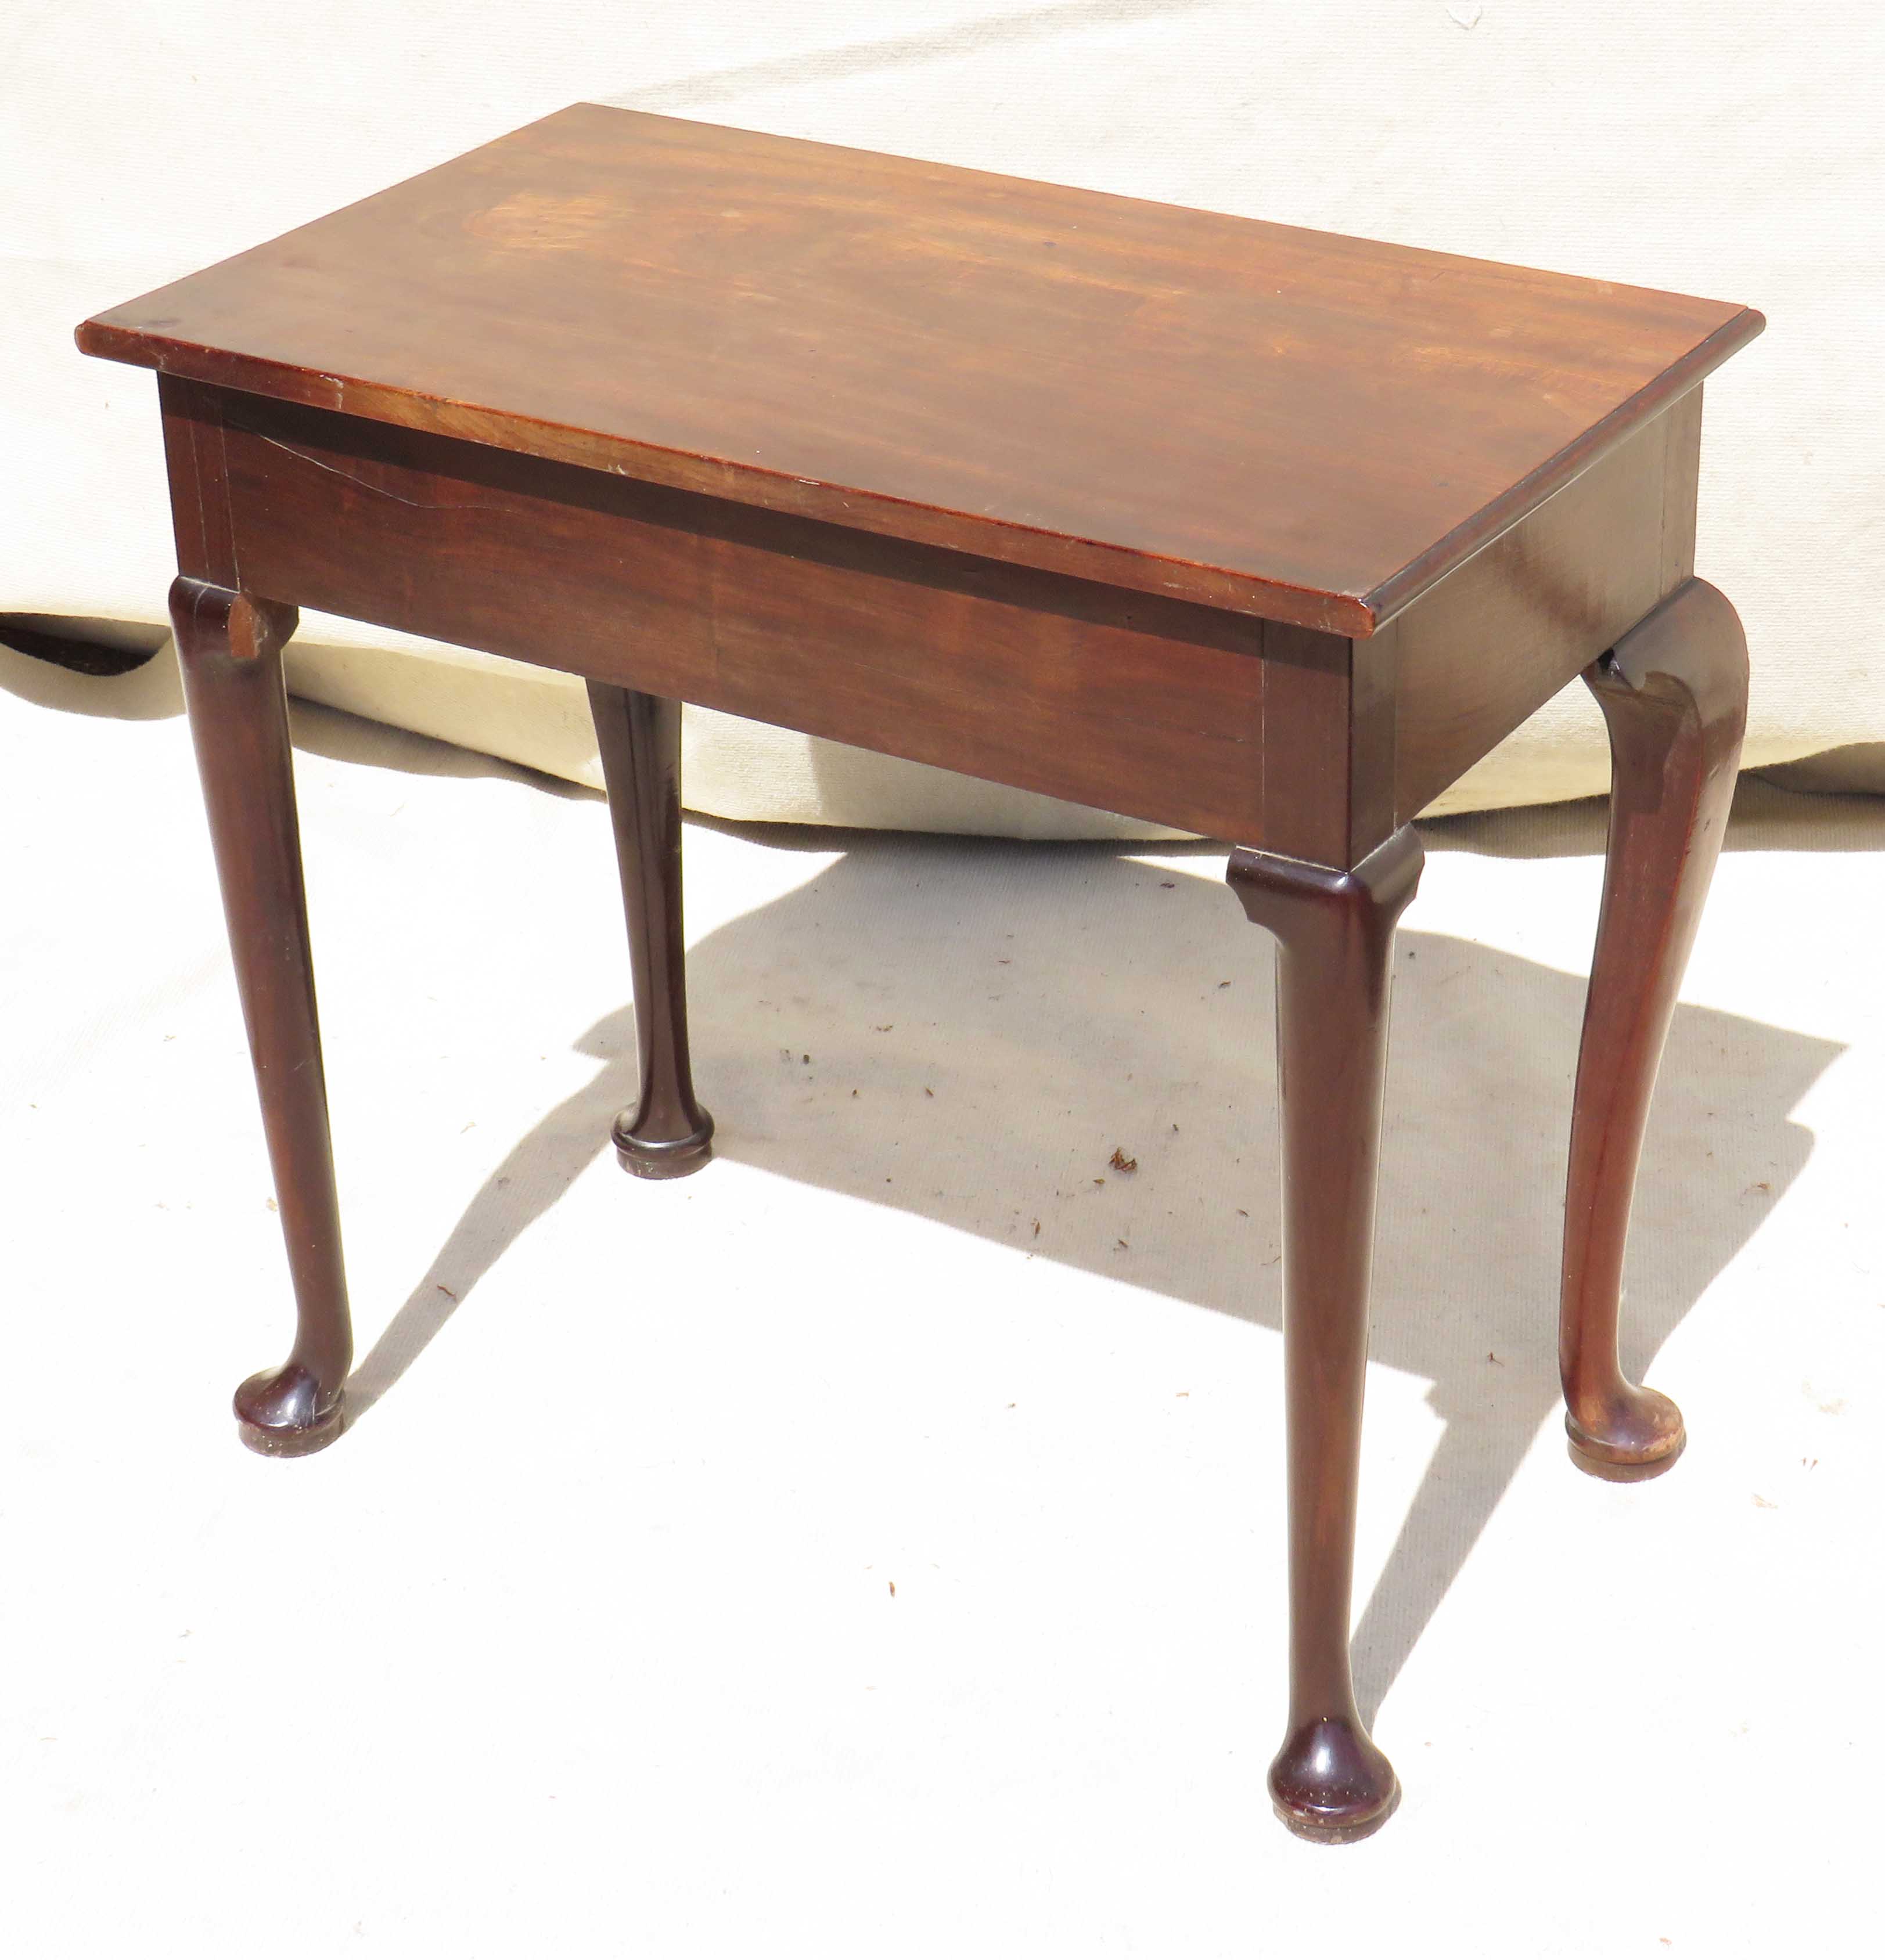 George II period 18th century mahogany side table - Image 4 of 5